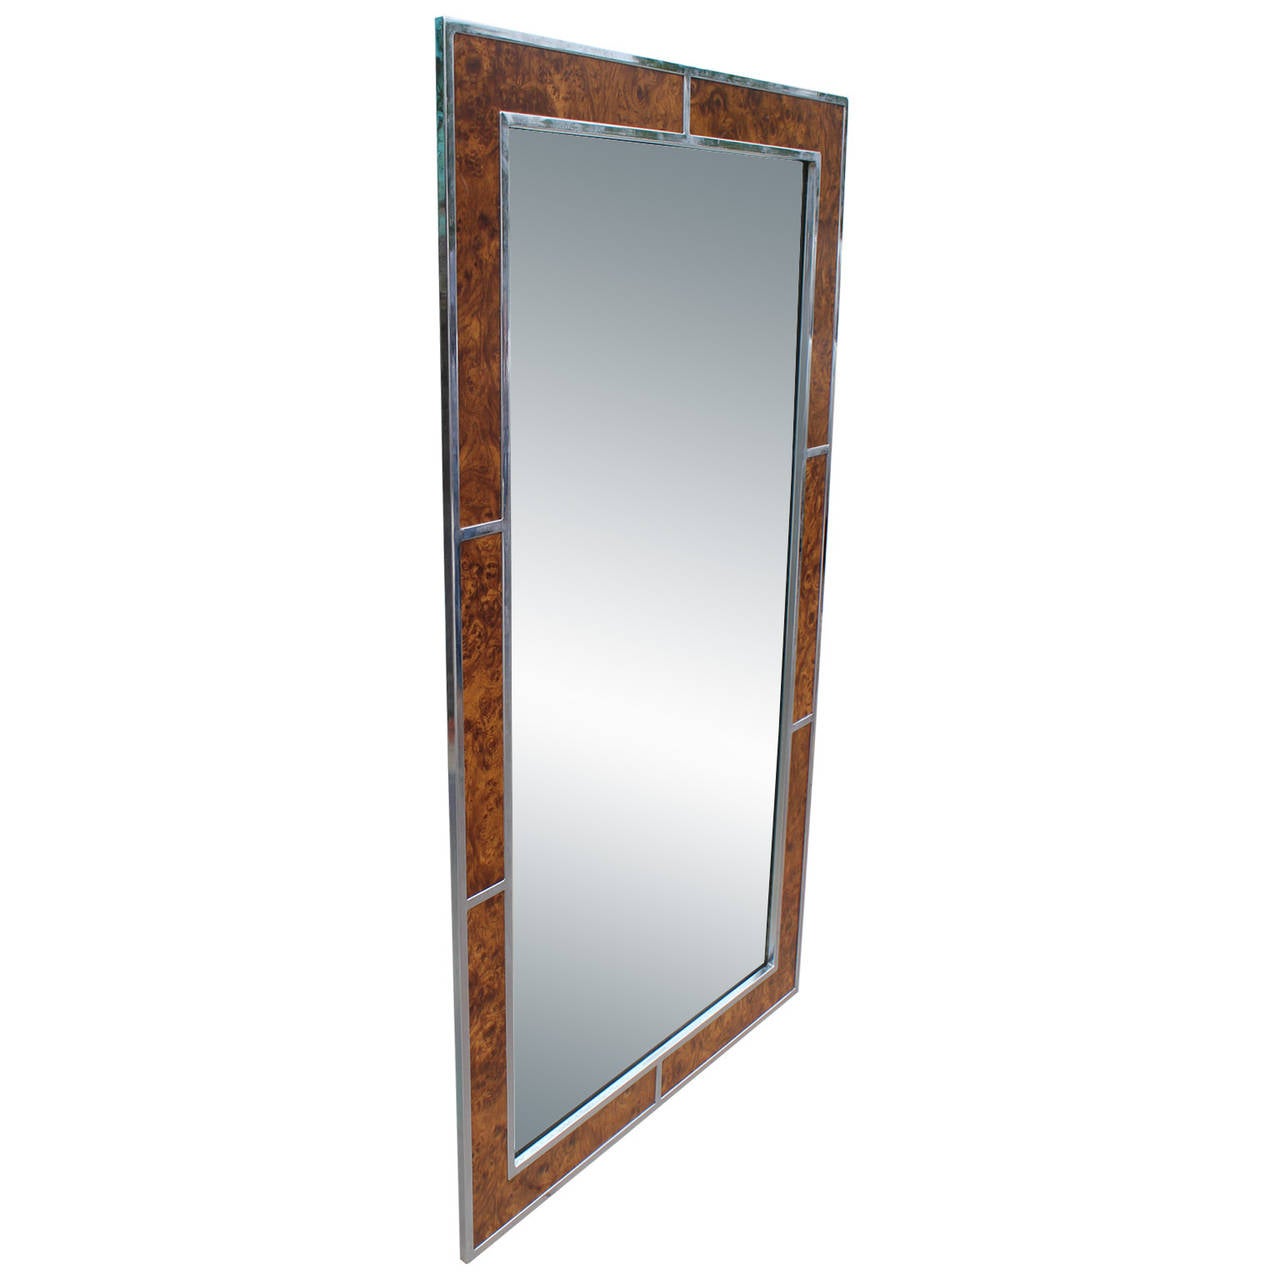 Beautiful MIlo Baughman style chrome and burl mirror. Mirror is in excellent vintage condition. Circa 1970.